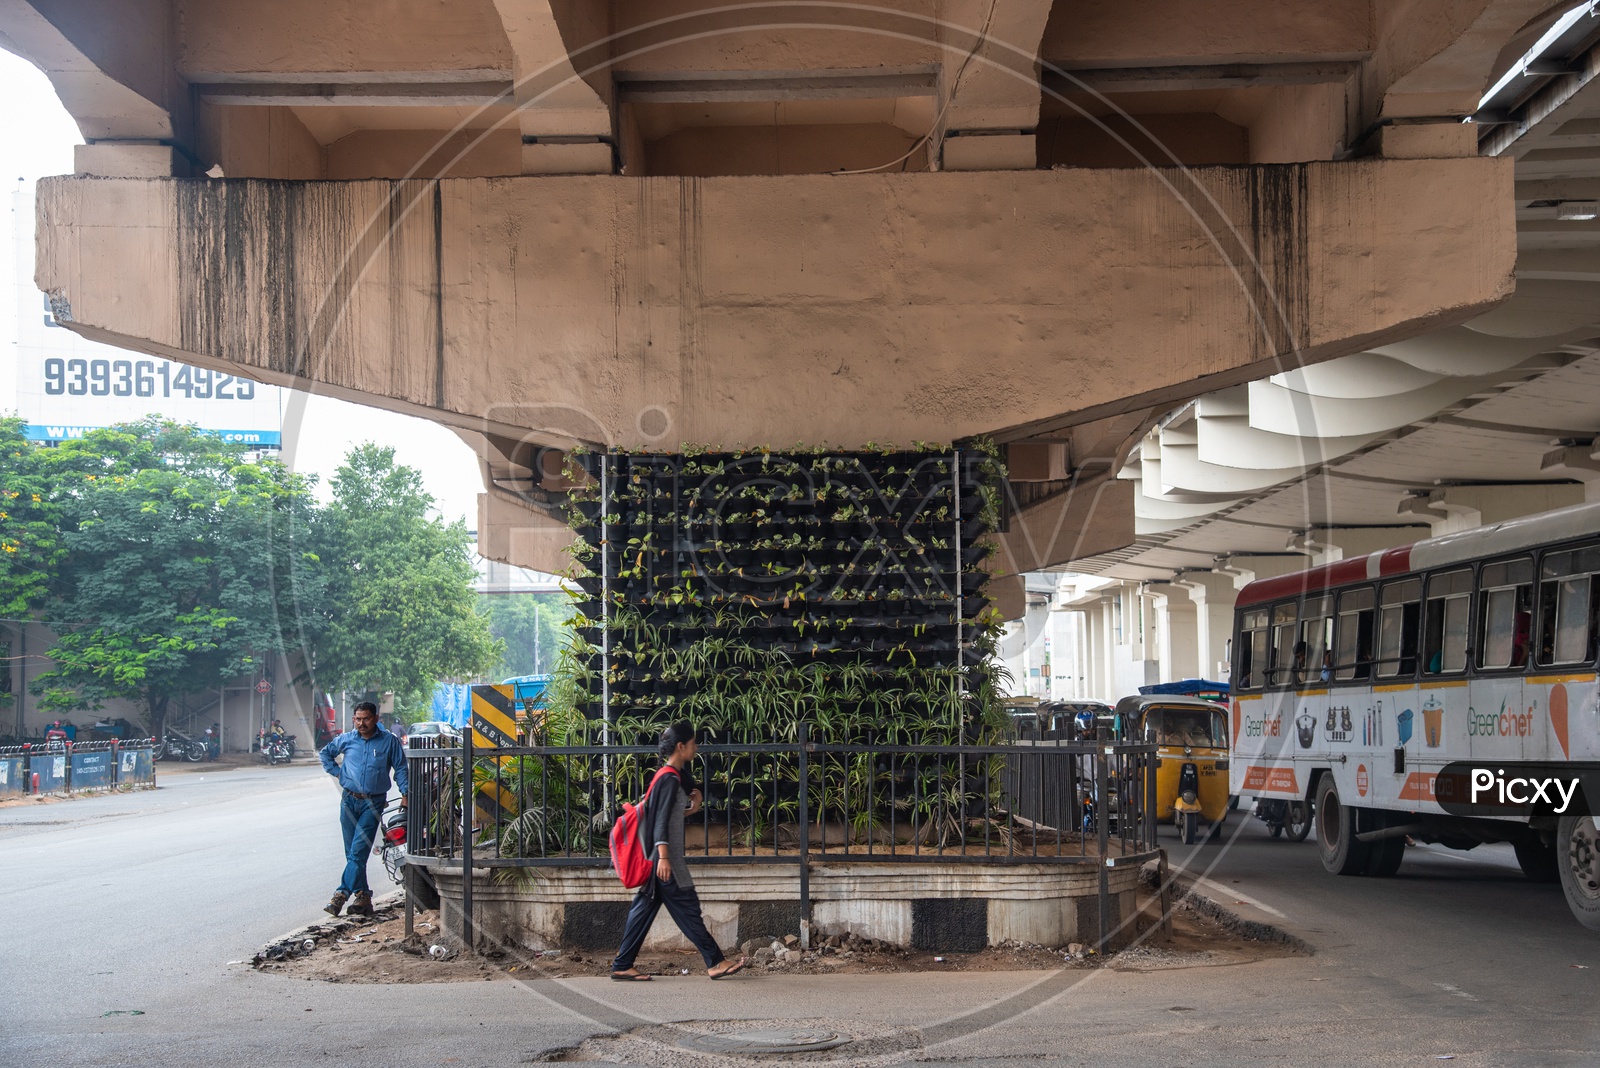 GHMC growing plants on Pillars of a Flyover at Paradise Circle, Hyderabad